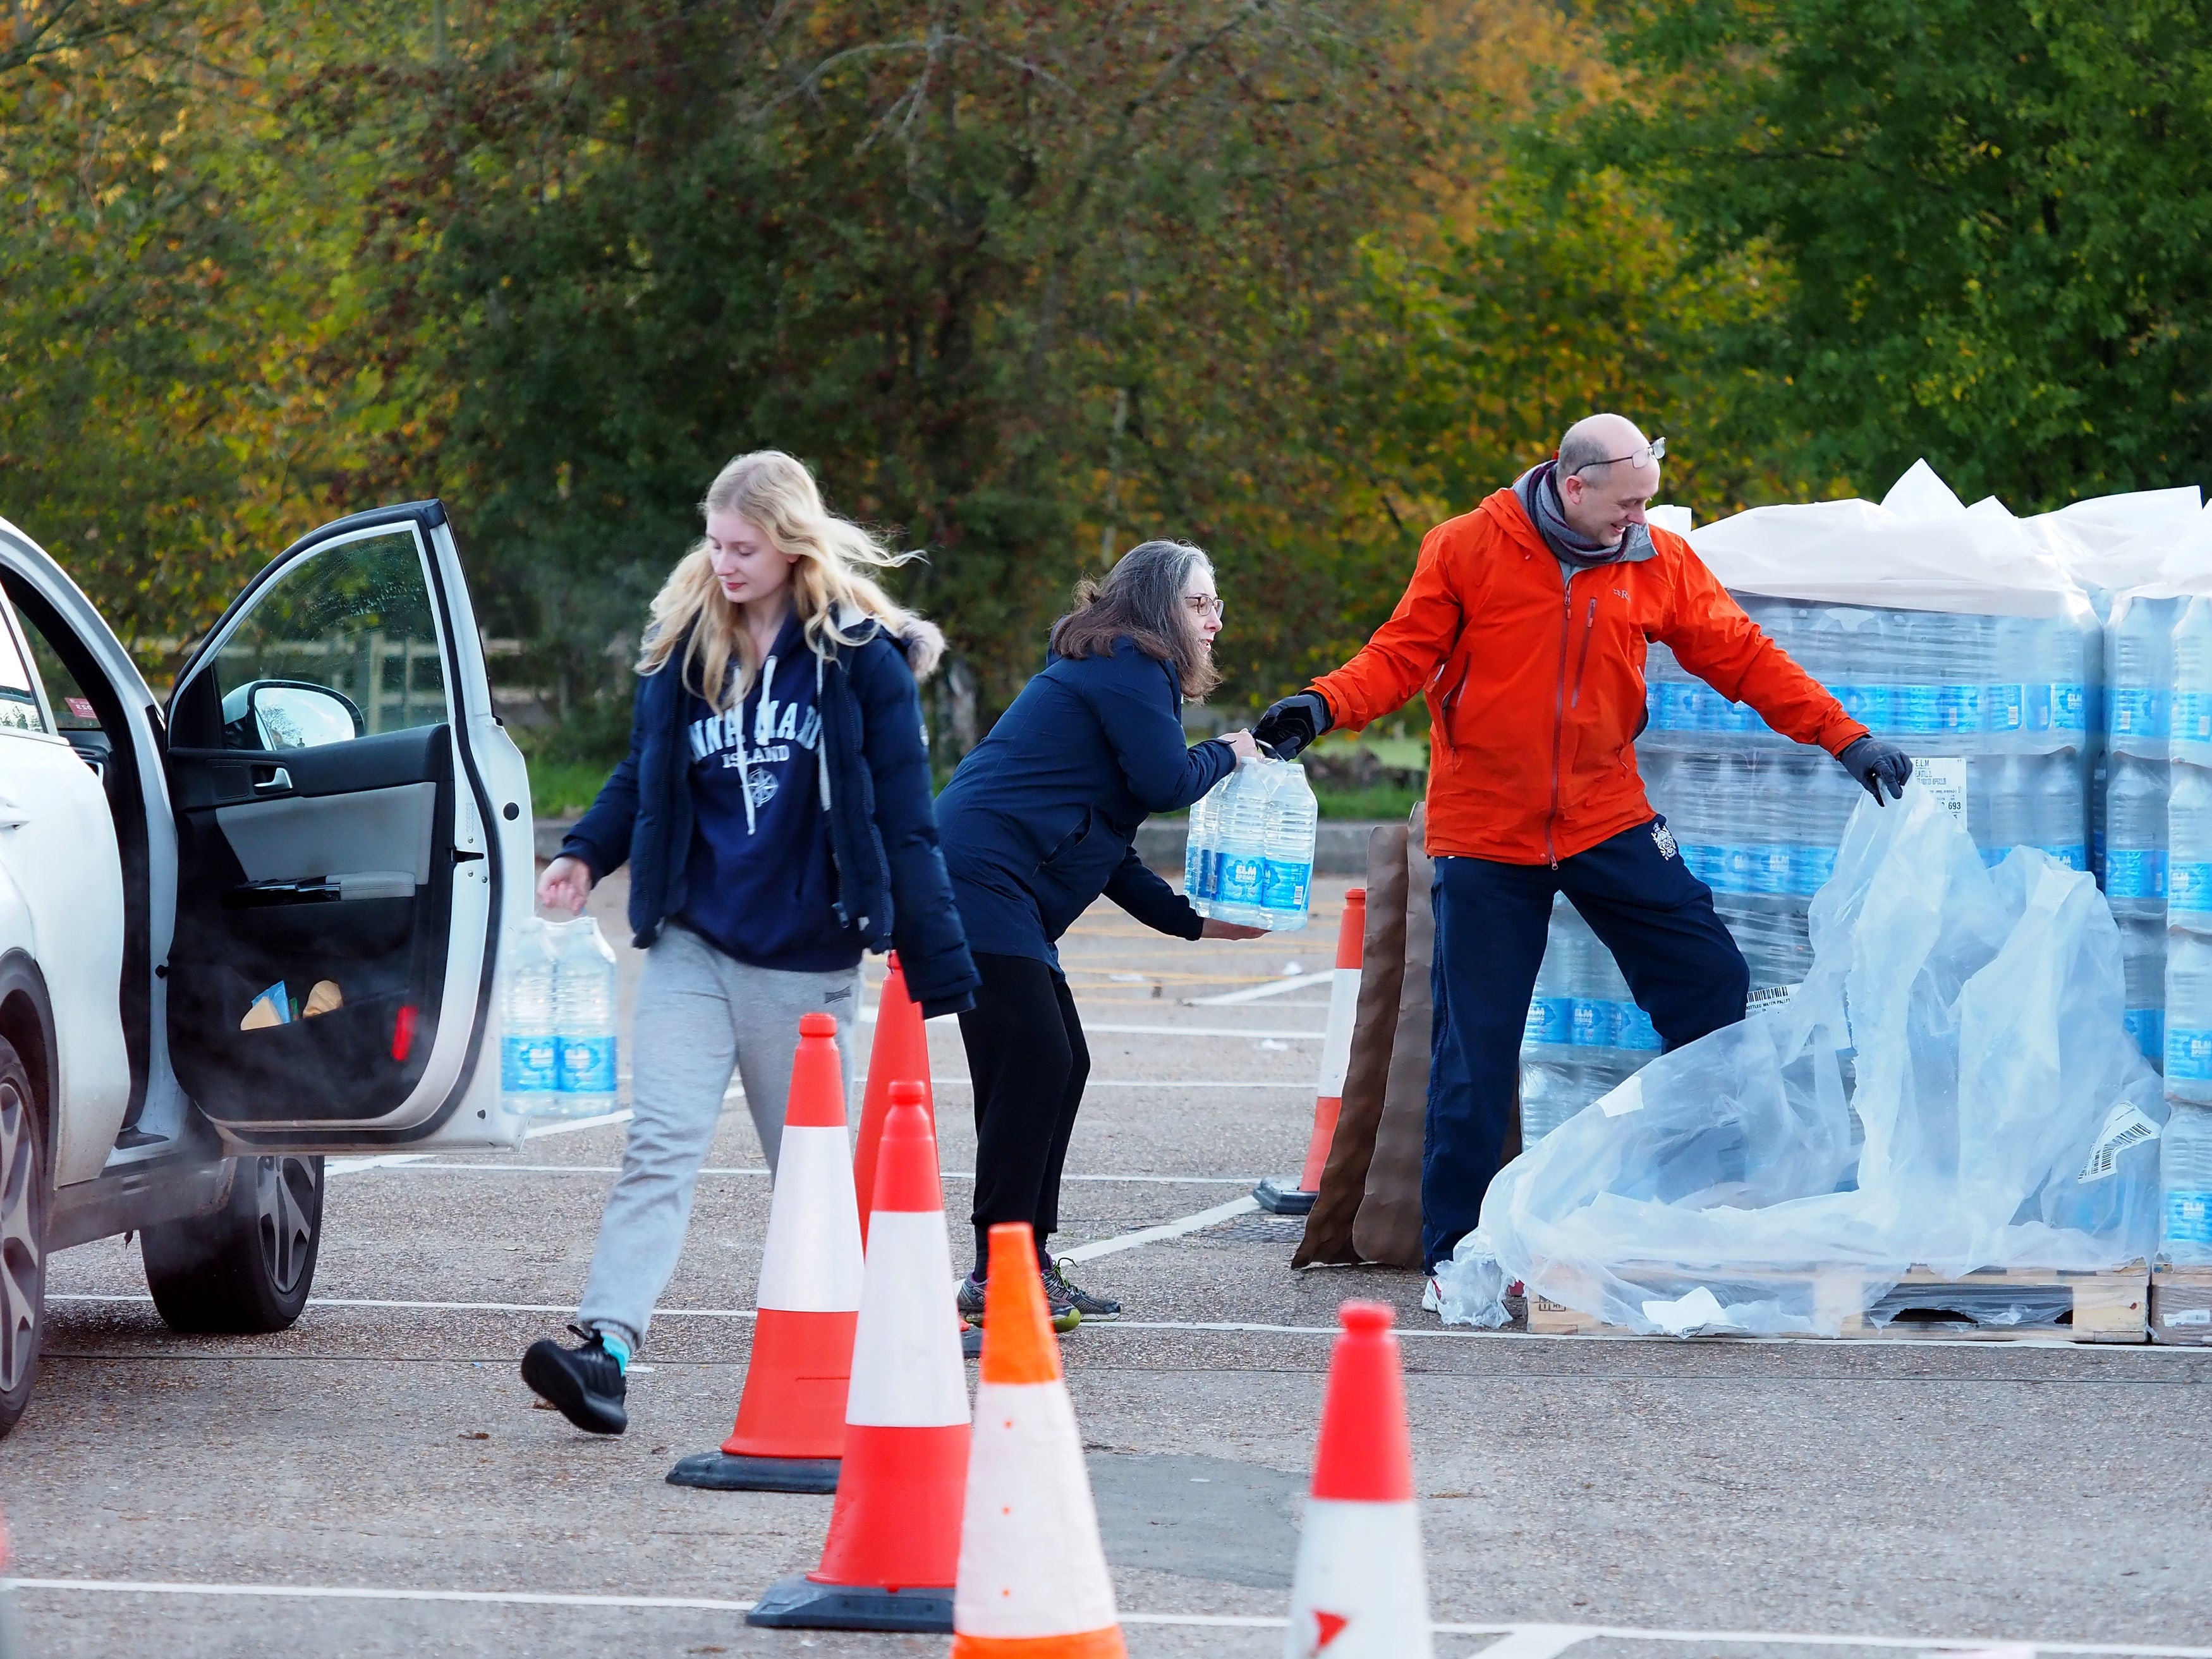 Residents of Godalming, Surrey, collect bottles of water after Storm Ciarán left the town without running water